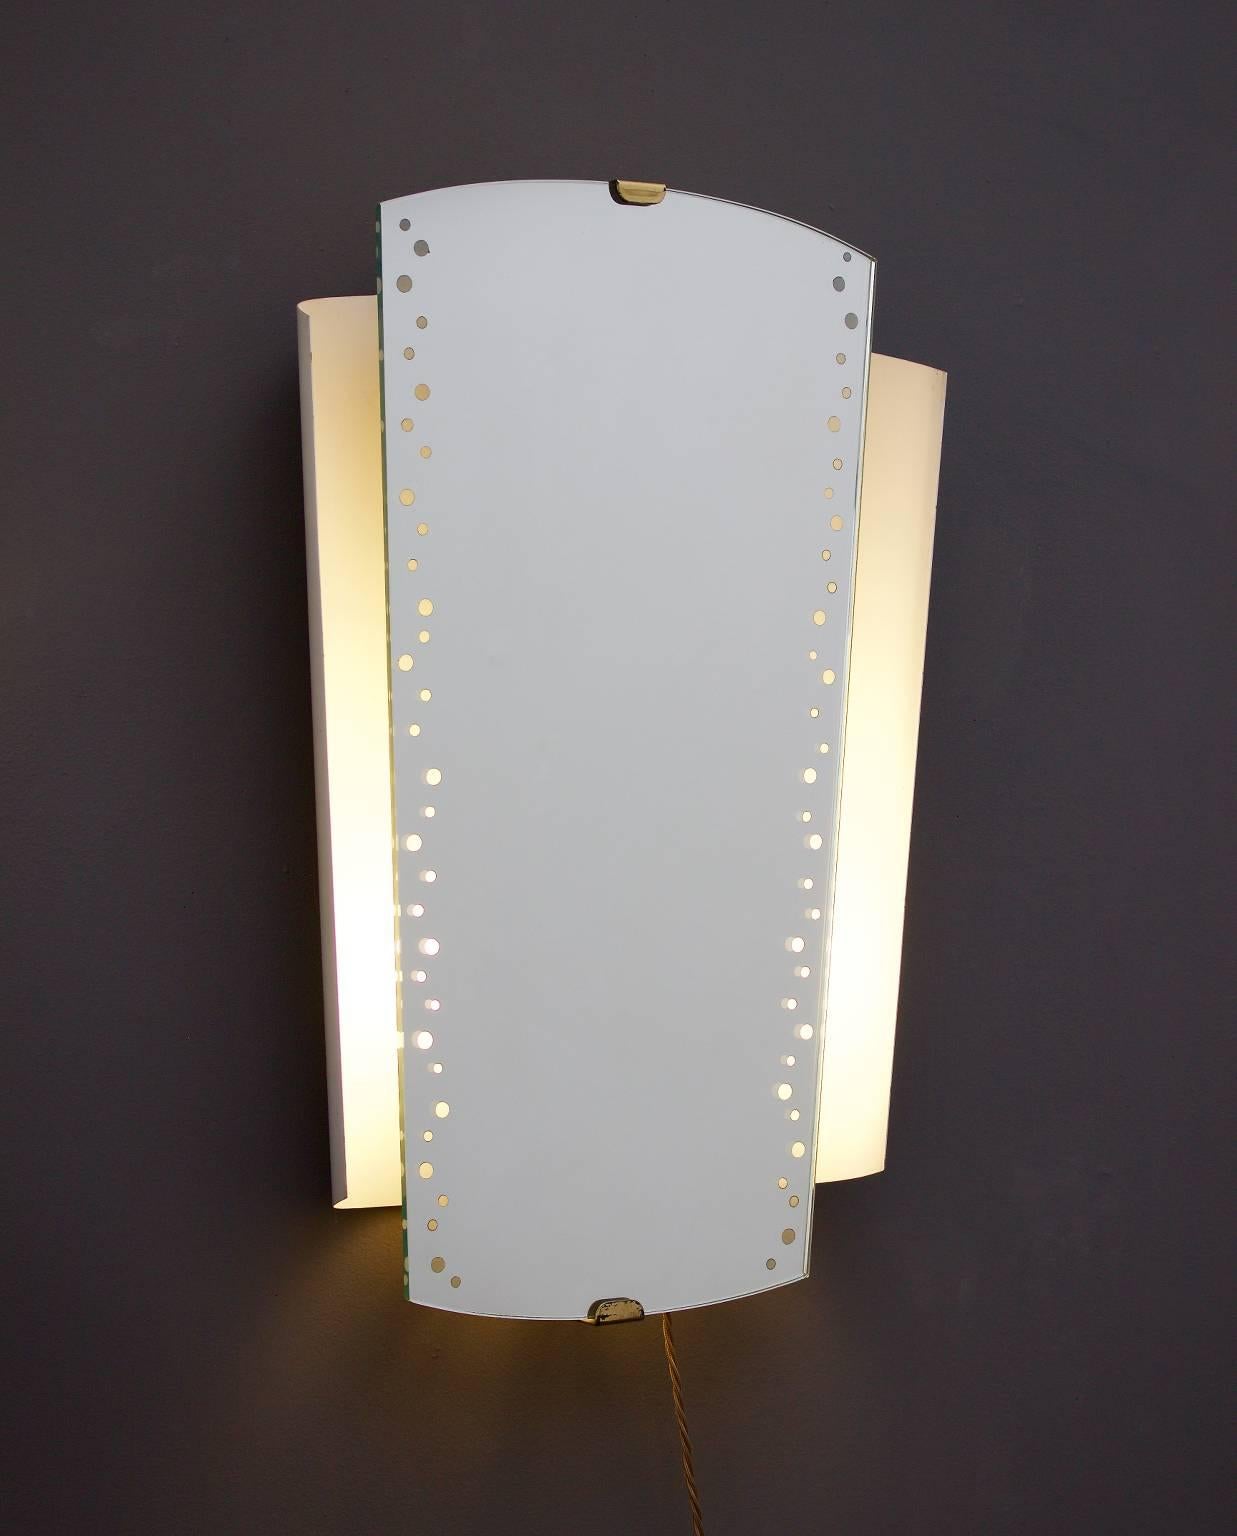 *** Spring sale***

Illuminated mirror by Ernst Igl for Hillebrand, Germany. Manufactured 1964 (date stamped on reverse of glass).

The off-white lacquered metal frame is wall-mounted, with the mirror glass set in brass clips top and bottom; light